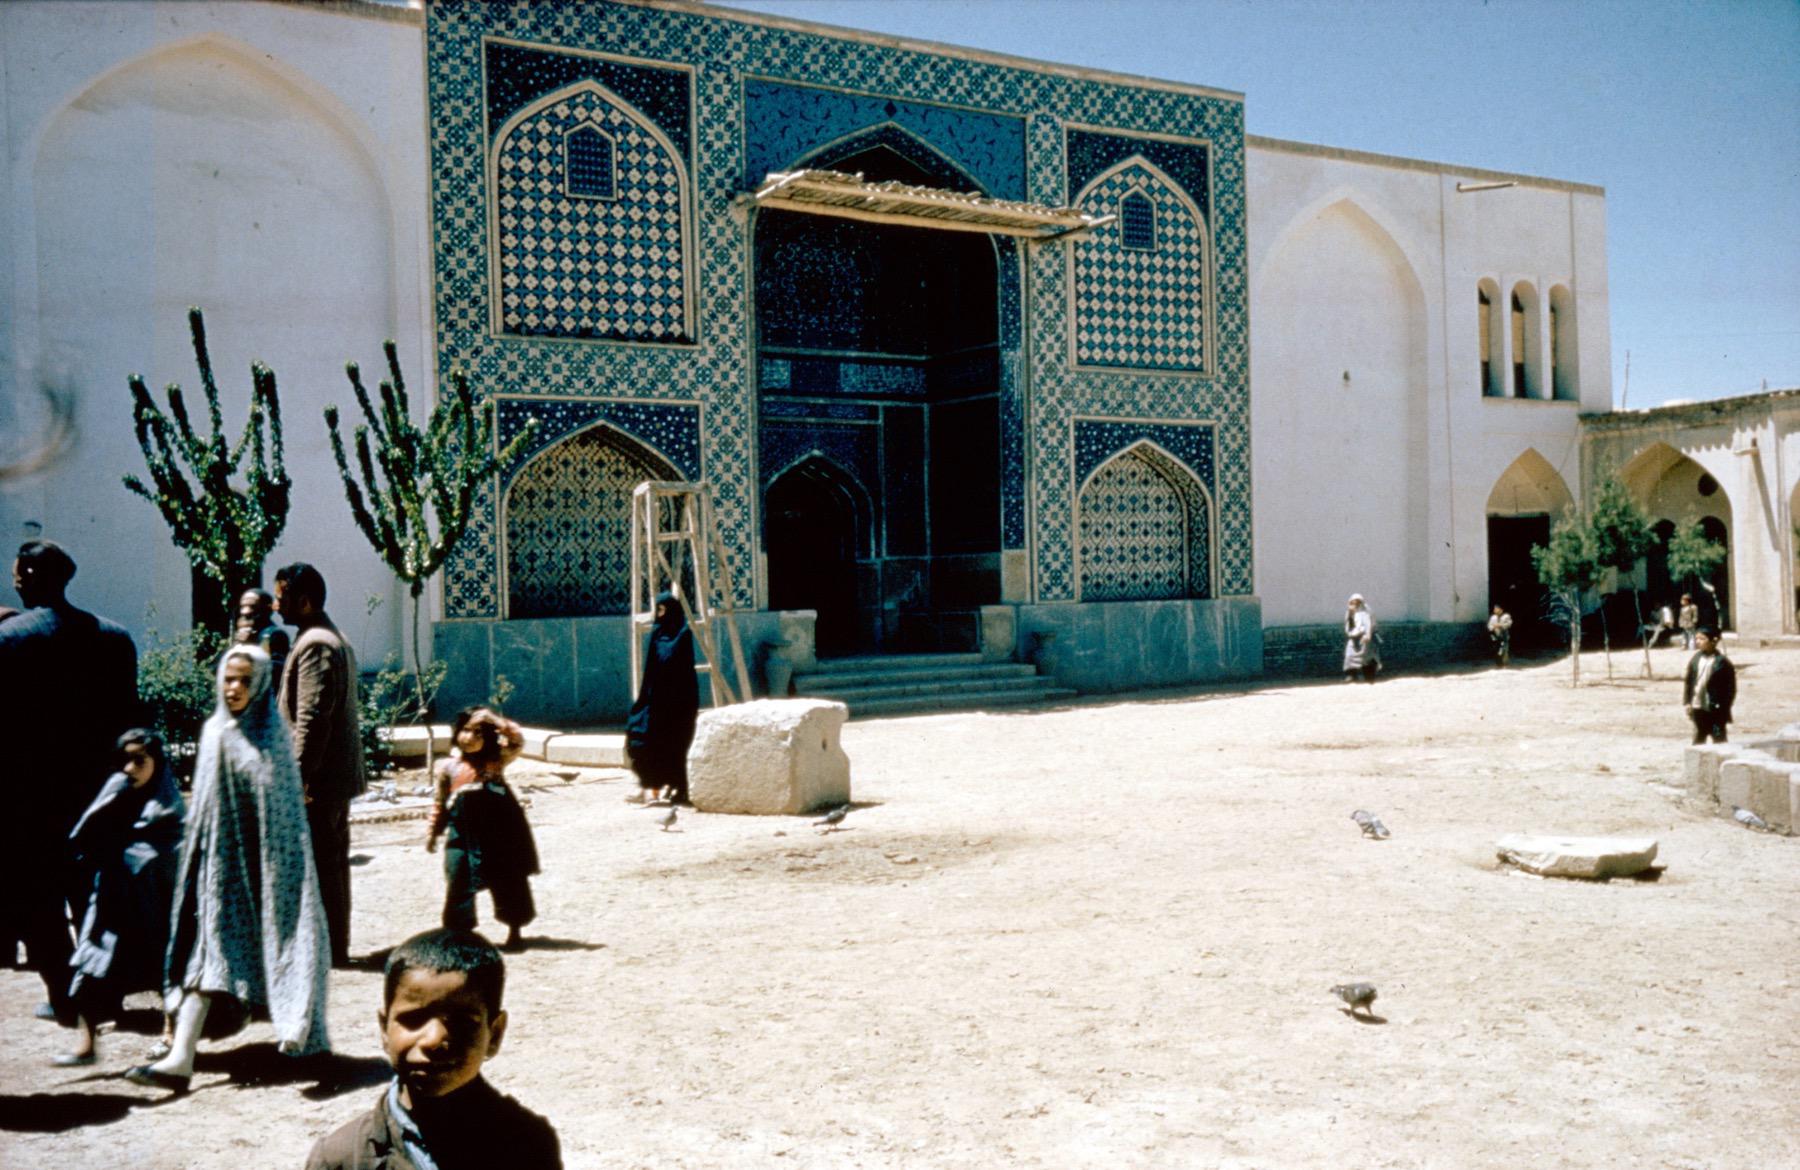 Southwest facade of northeast courtyard, view of central portal leading to madrasa before recent restorations.